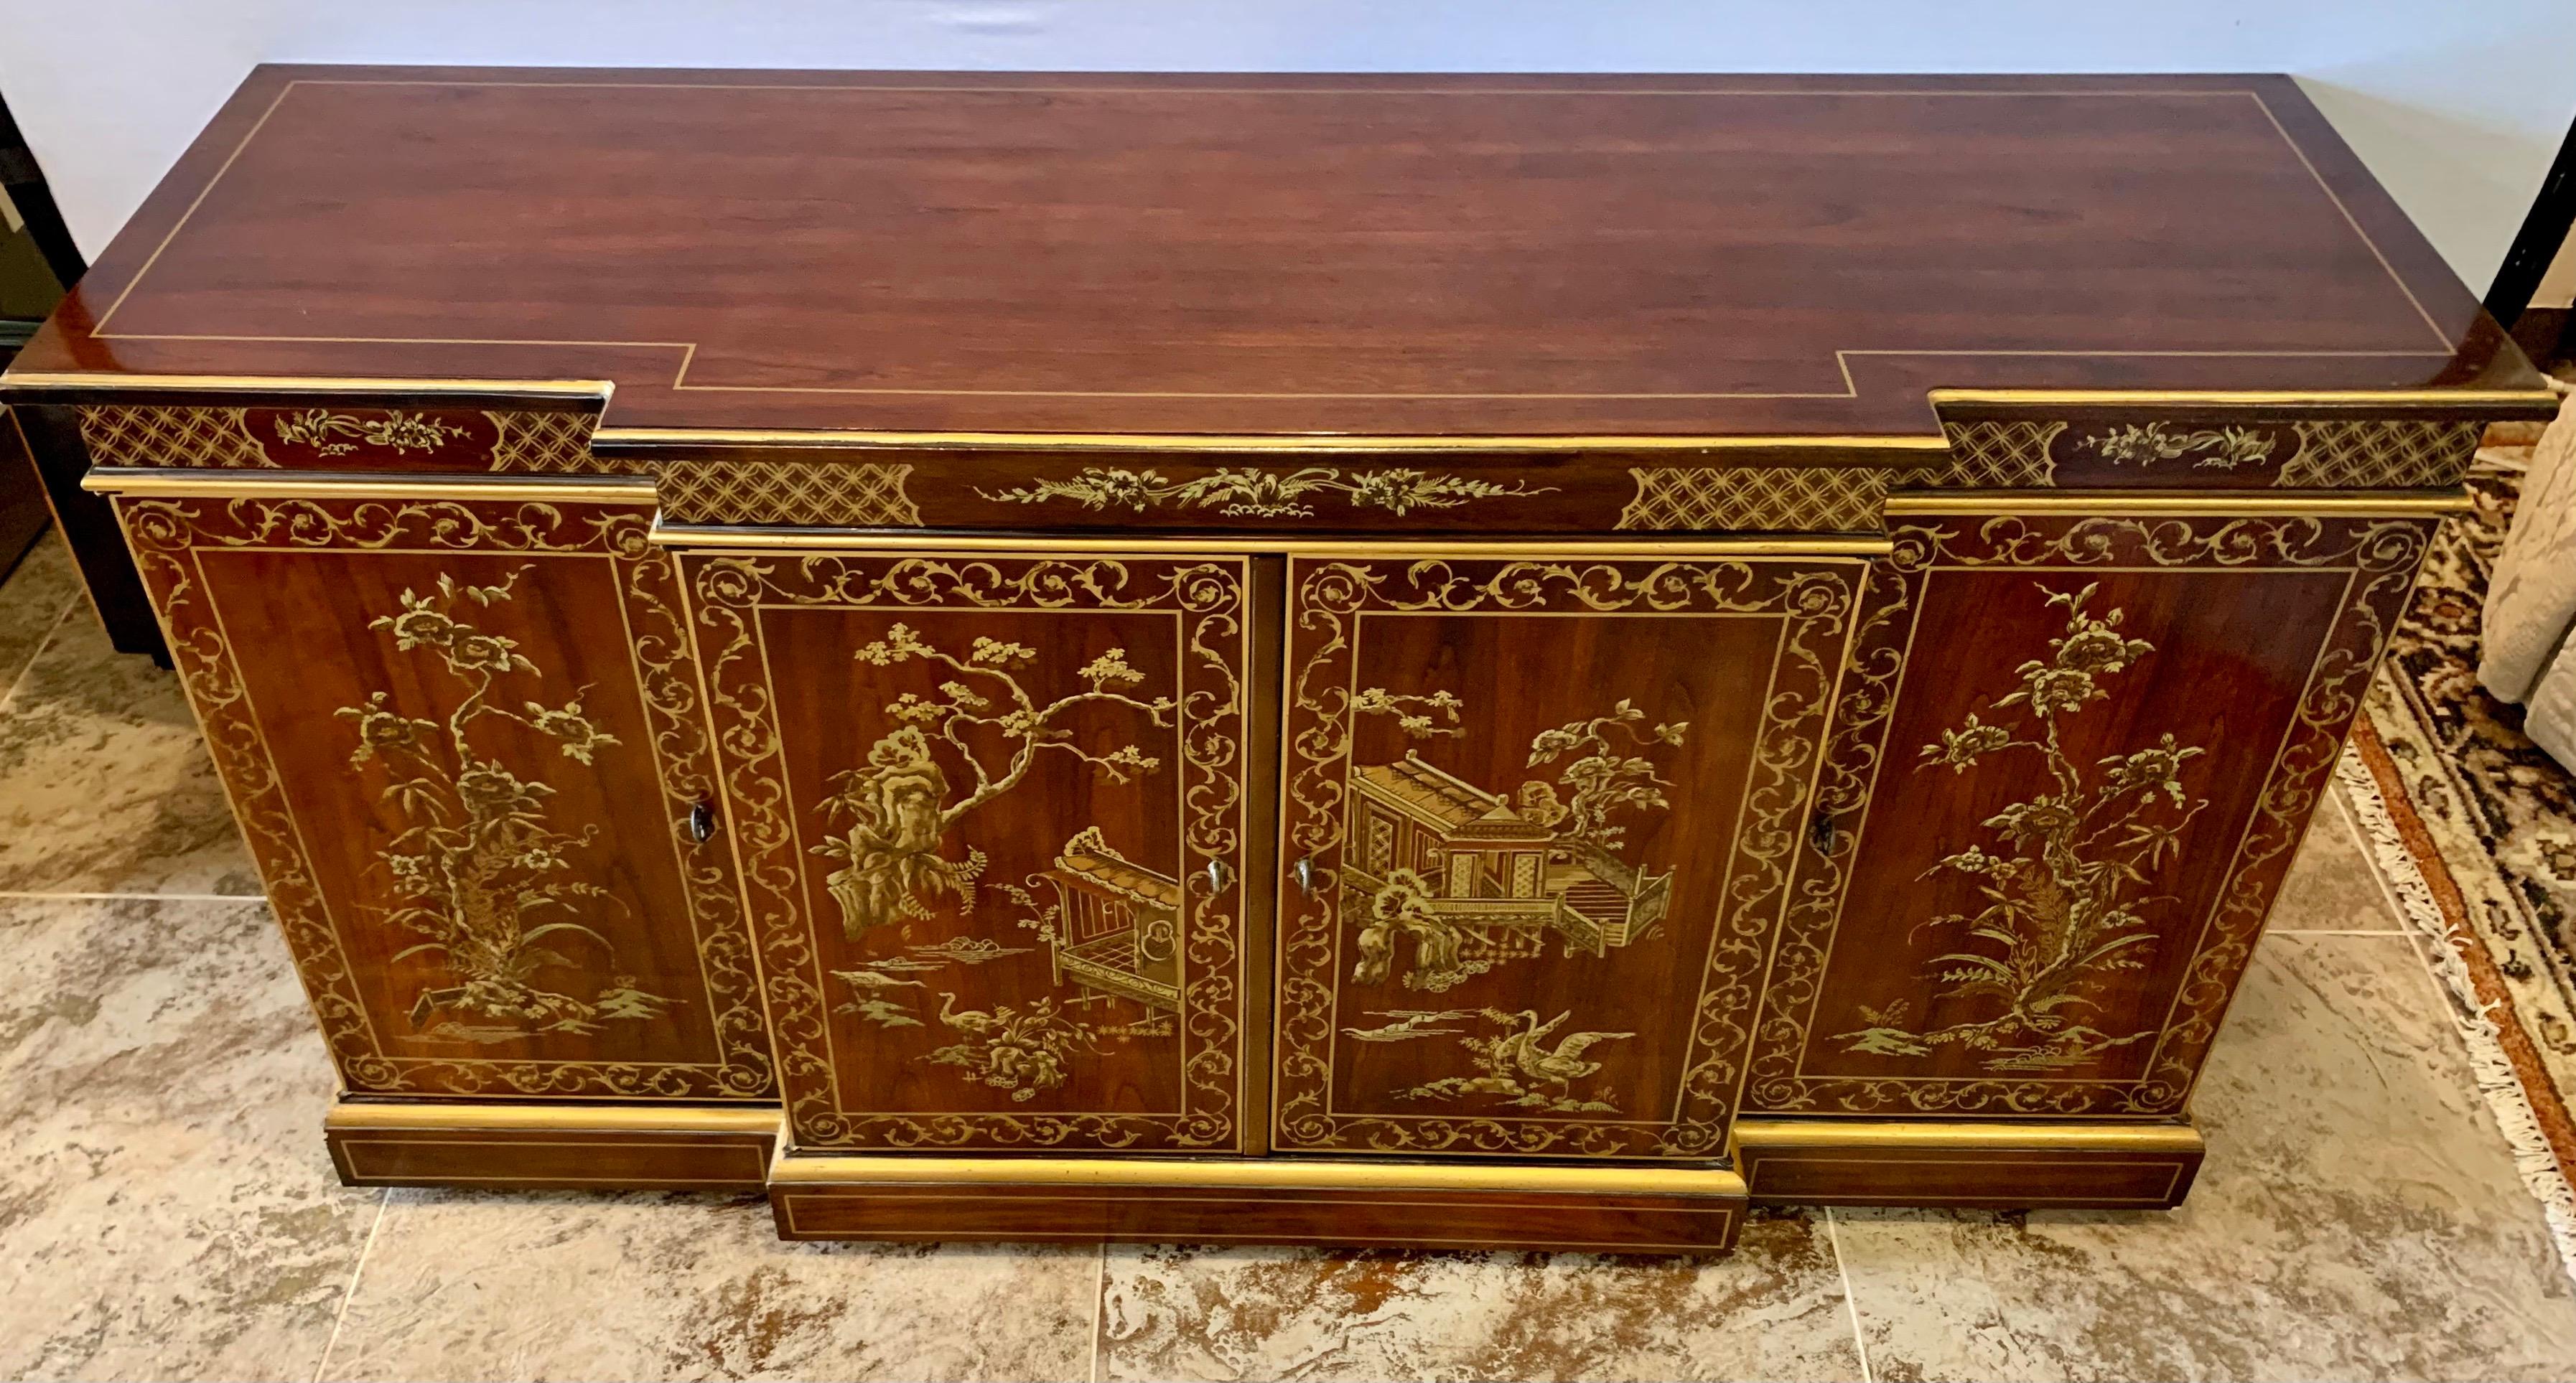 Signed Drexel chinoiserie sideboard/buffet with gorgeous period design as well as felt sterling silverware interior top drawer. If you are looking for storage but have exquisite taste, this could be for you. Mahogany wood throughout.